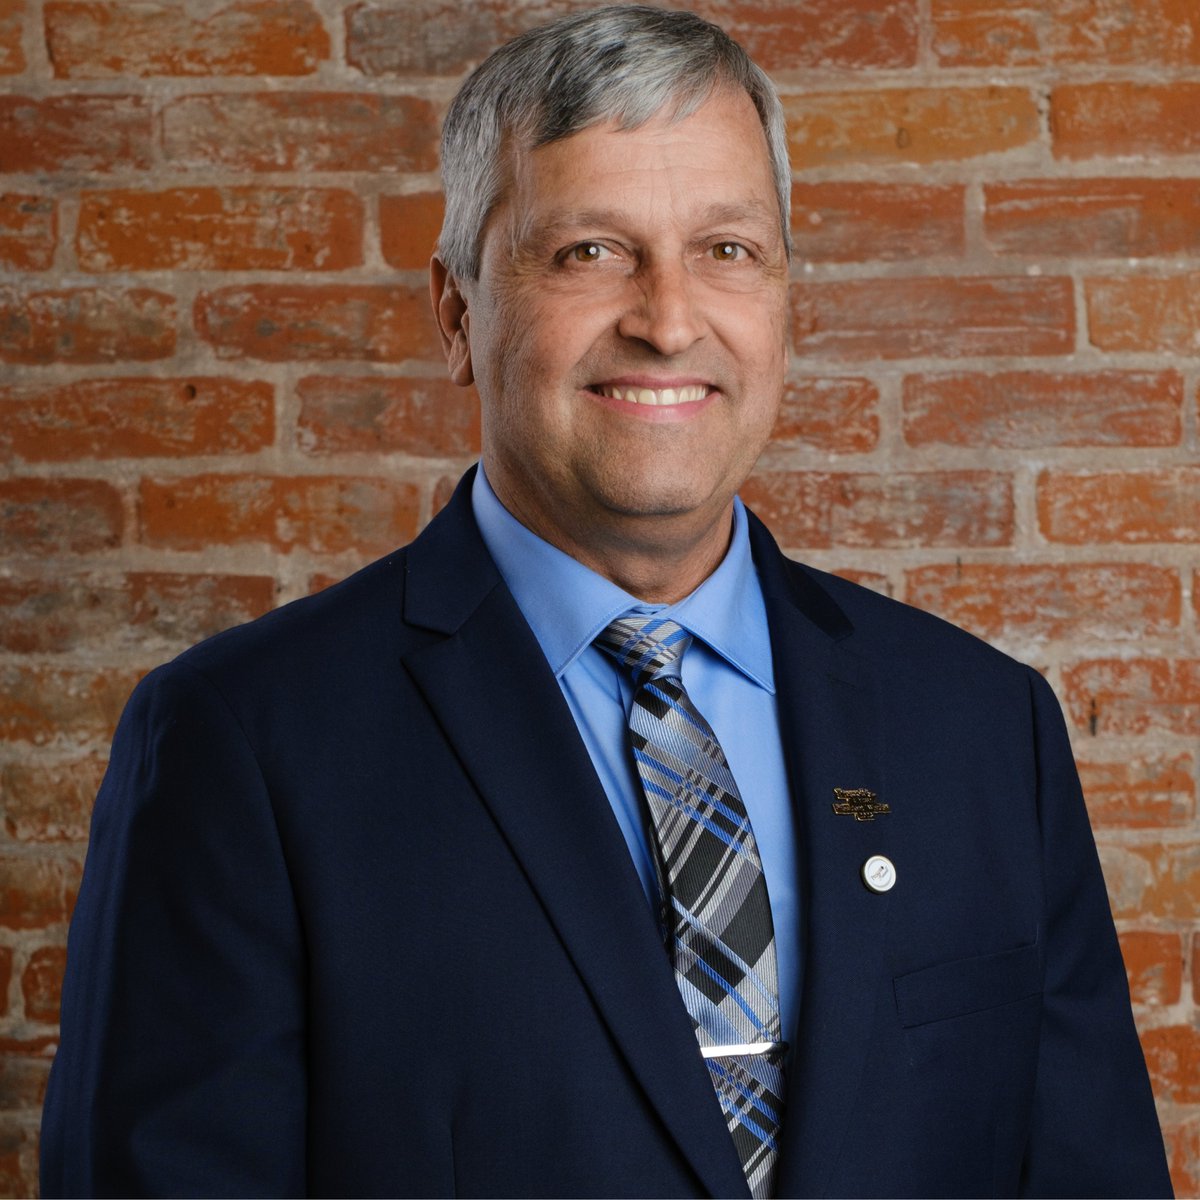 The United Counties of Prescott and Russell (UCPR) are pleased to announce that Mr. Normand Riopel, Mayor of Township of Champlain, has been appointed Interim Warden of the UCPR.